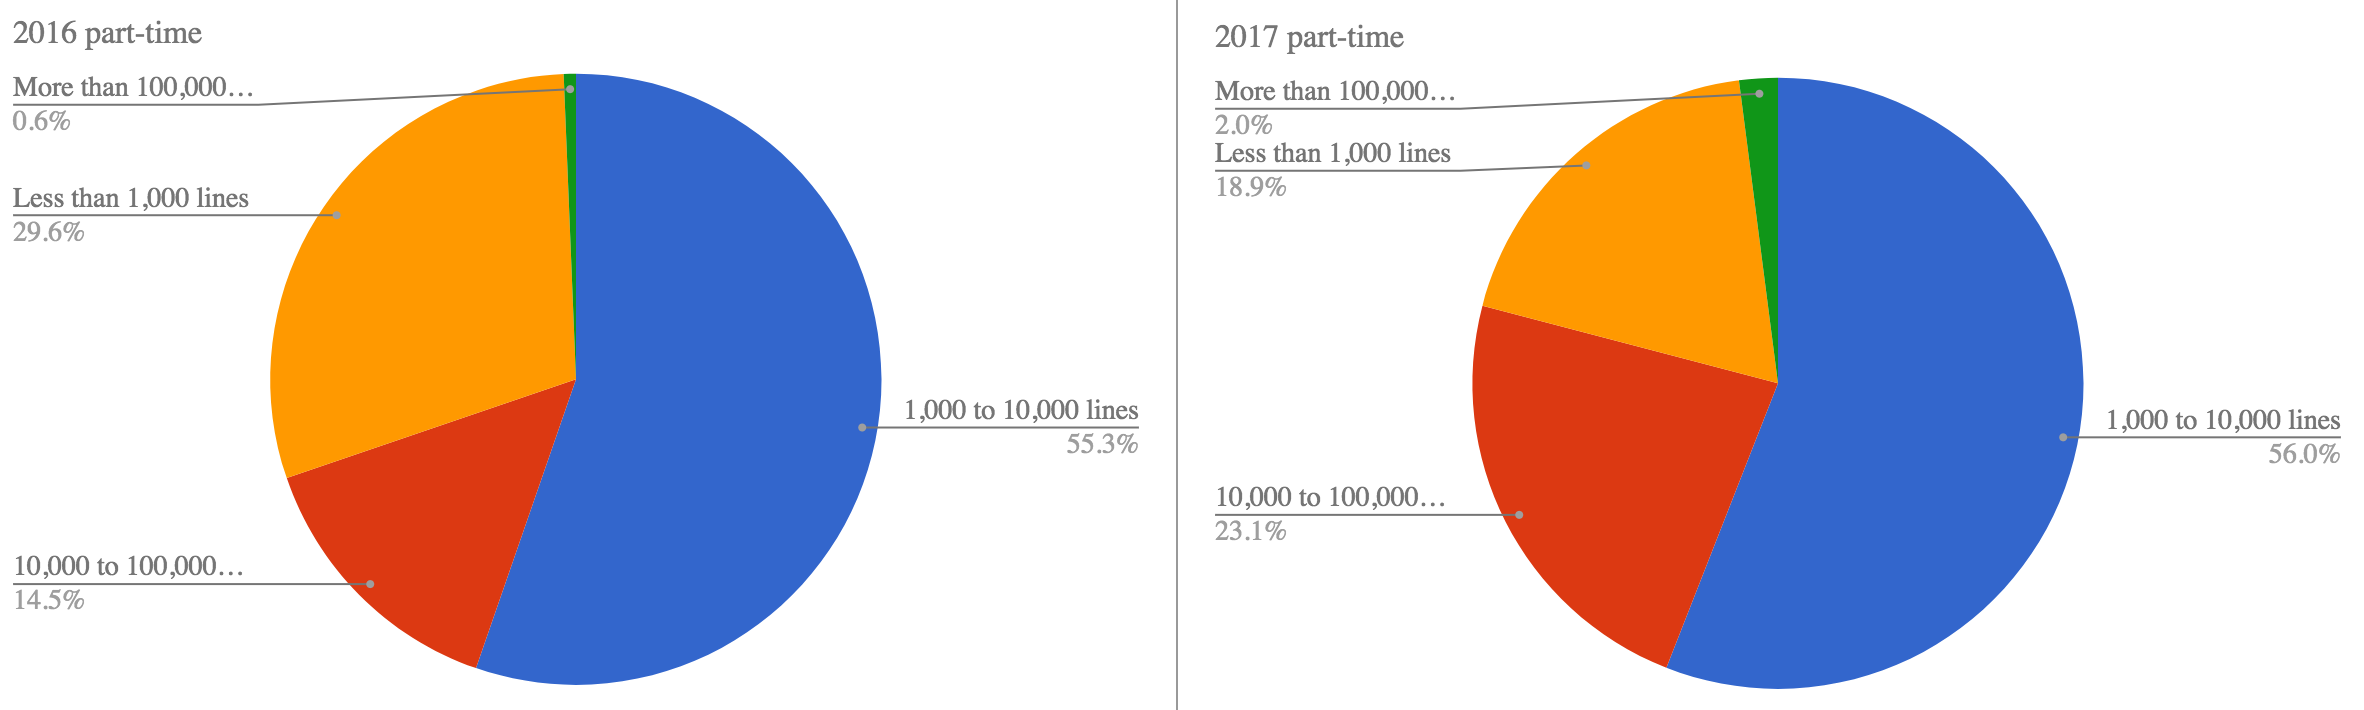 Two charts part-time: 2016: 29.6% less than 1000 lines, 55.3% 1000 to 10000 lines, 14.5% 10000 to 100000 lines, 0.6% 100000 lines. 2017: 18.9% less than 1000 lines, 56% 1000 to 10000 lines, 23.1% 10000 to 100000 lines, 2% more than 100000 lines